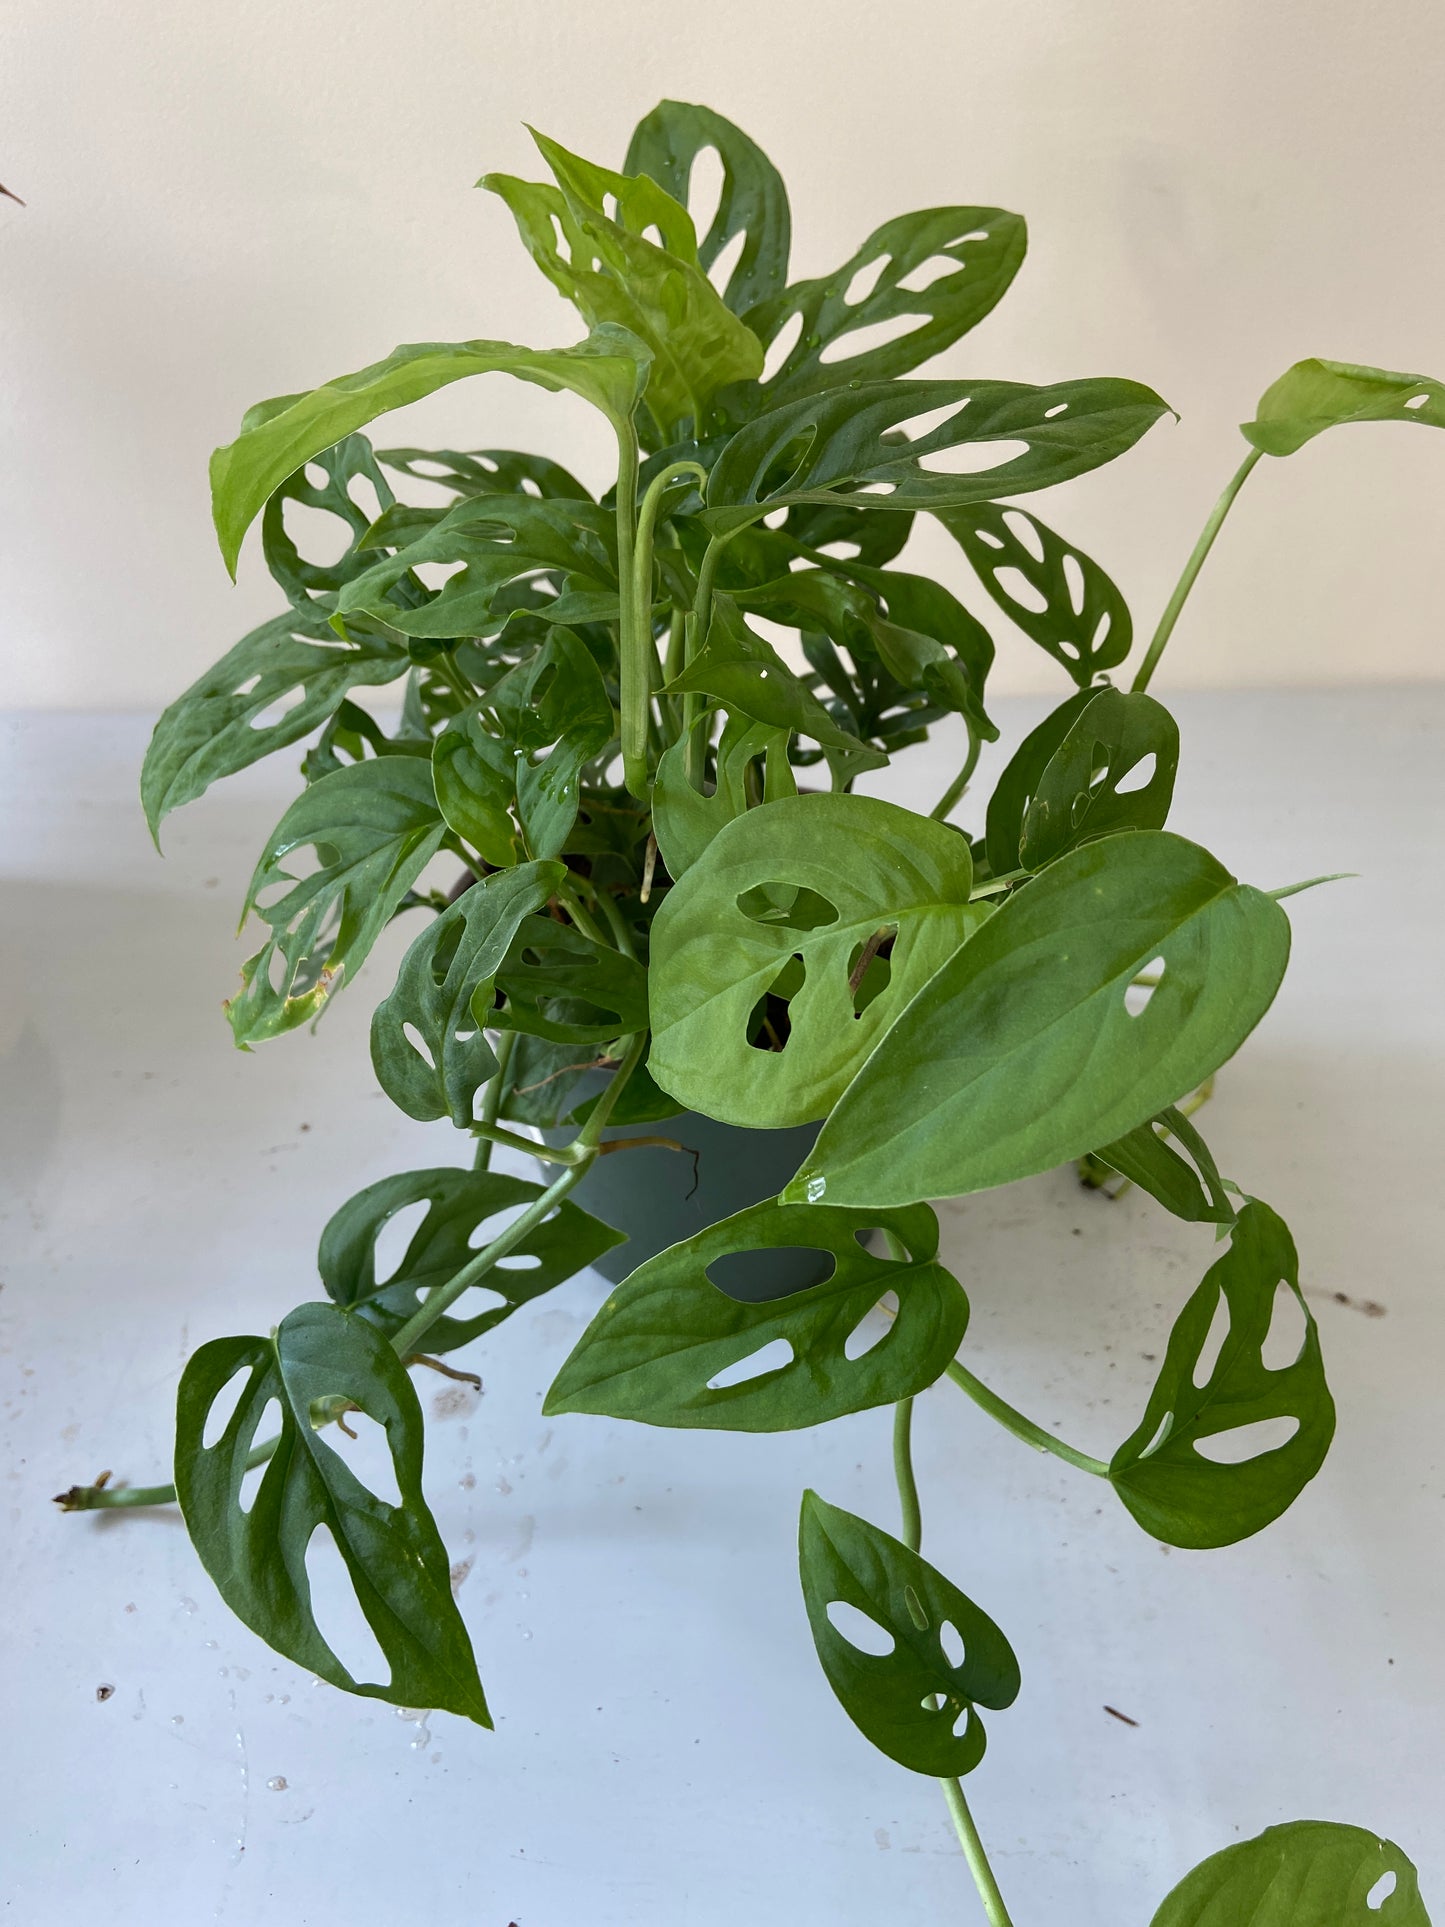 Monstera Adansonii "Swiss Cheese" Plant - 6" Hanging Container